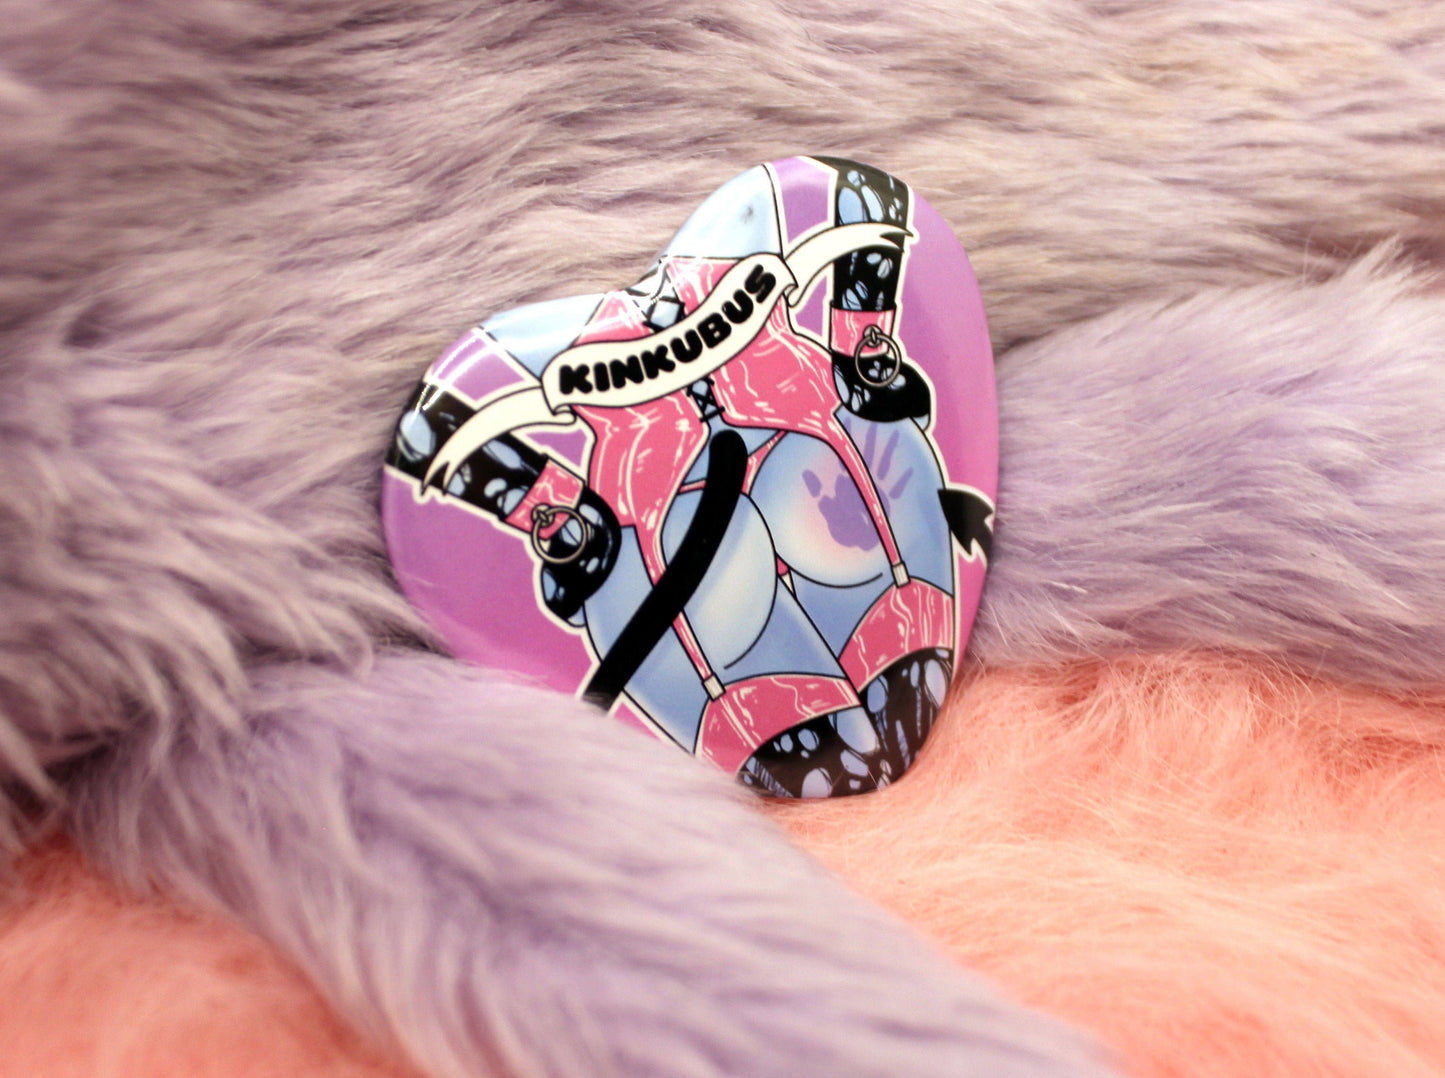 Kinkubus Blue Succubus Heart Badge (55mm) - Pink and Blue Variant